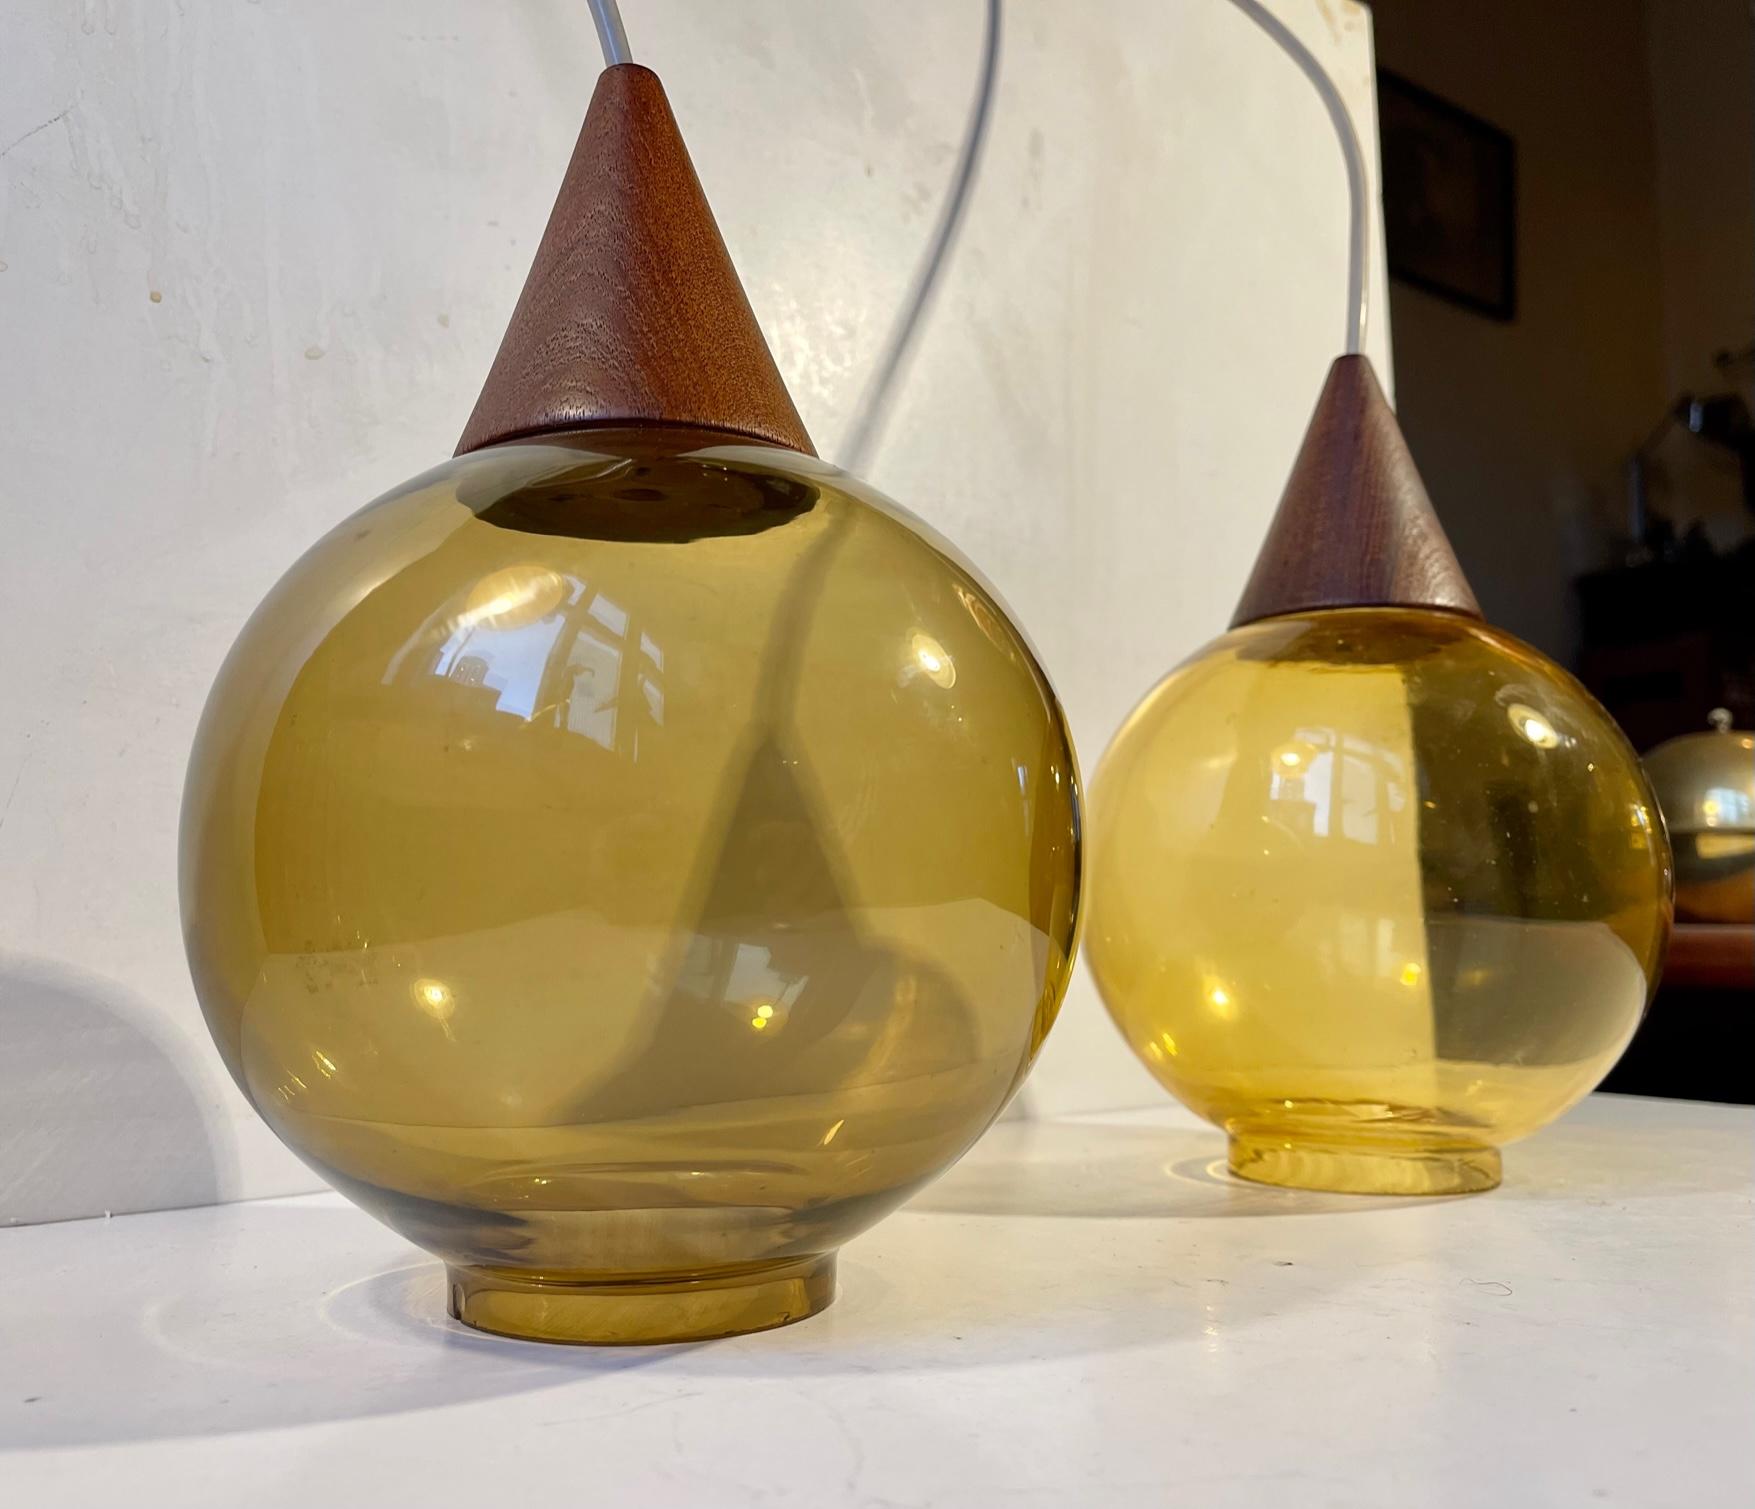 Unusual hanging pendant lights that resembles some of Hans Agne Jakobsson´s designs. Made from colored mouth-blown smoke glass and set in conical teak tops. The glass shades has diffrent color tones (one olive green and one amber yellow). Made by an